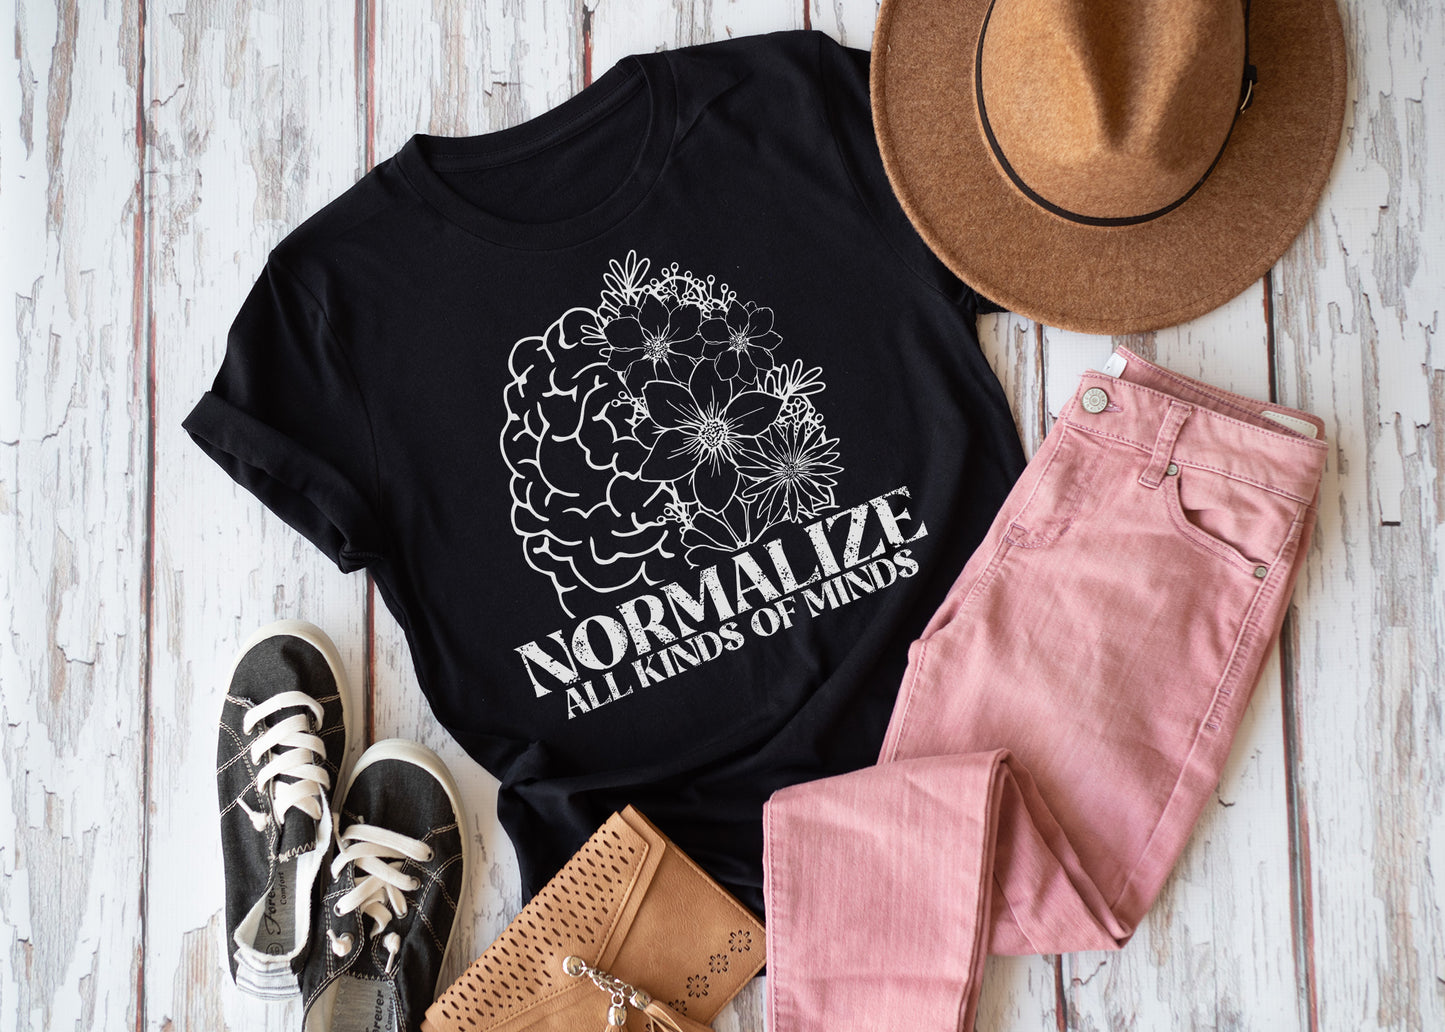 Normalize all types of minds tee